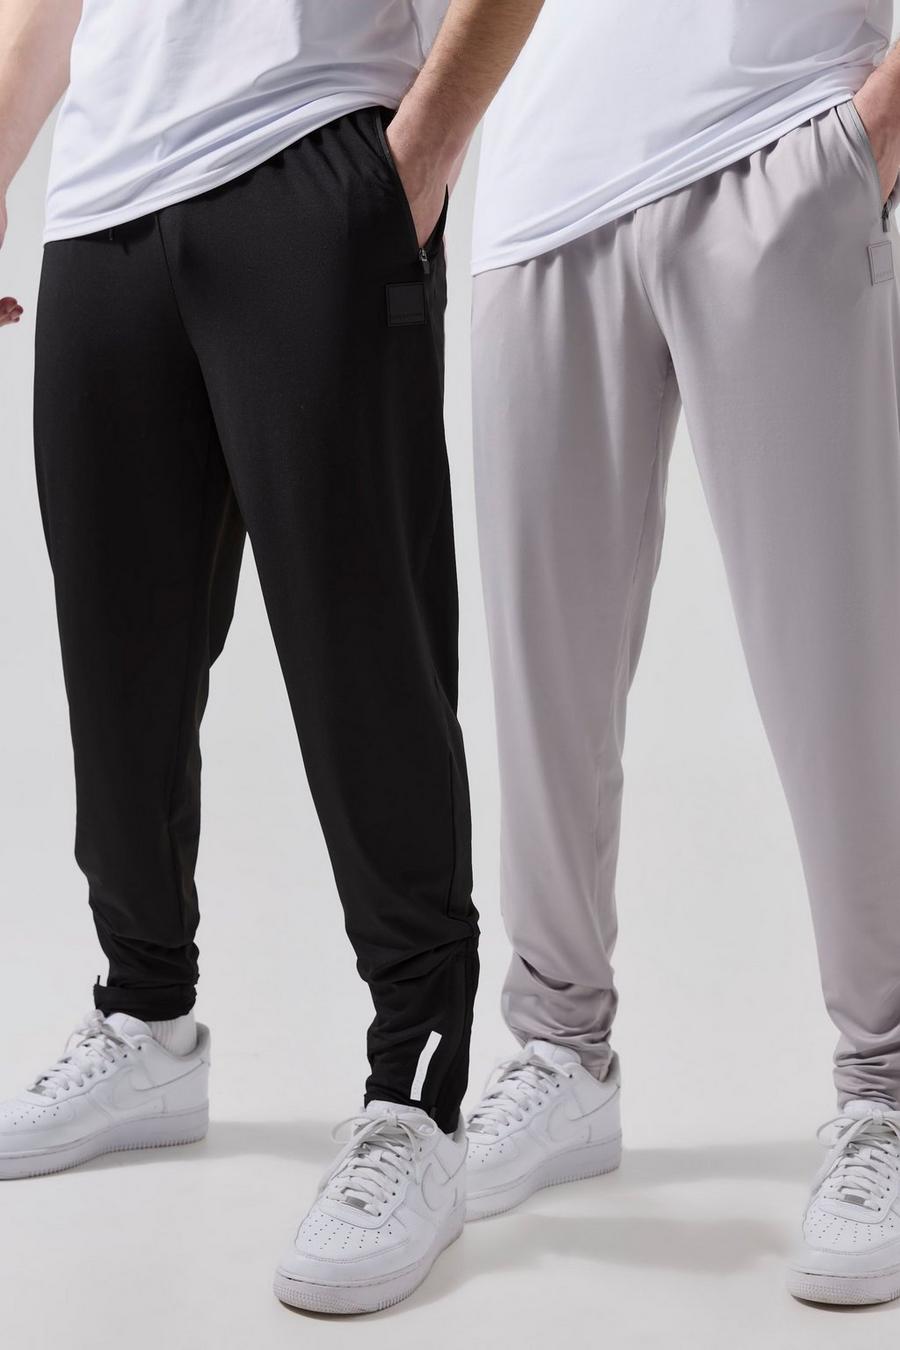 Multi Tall Man Active Gym Performance Sweatpant 2 Pack